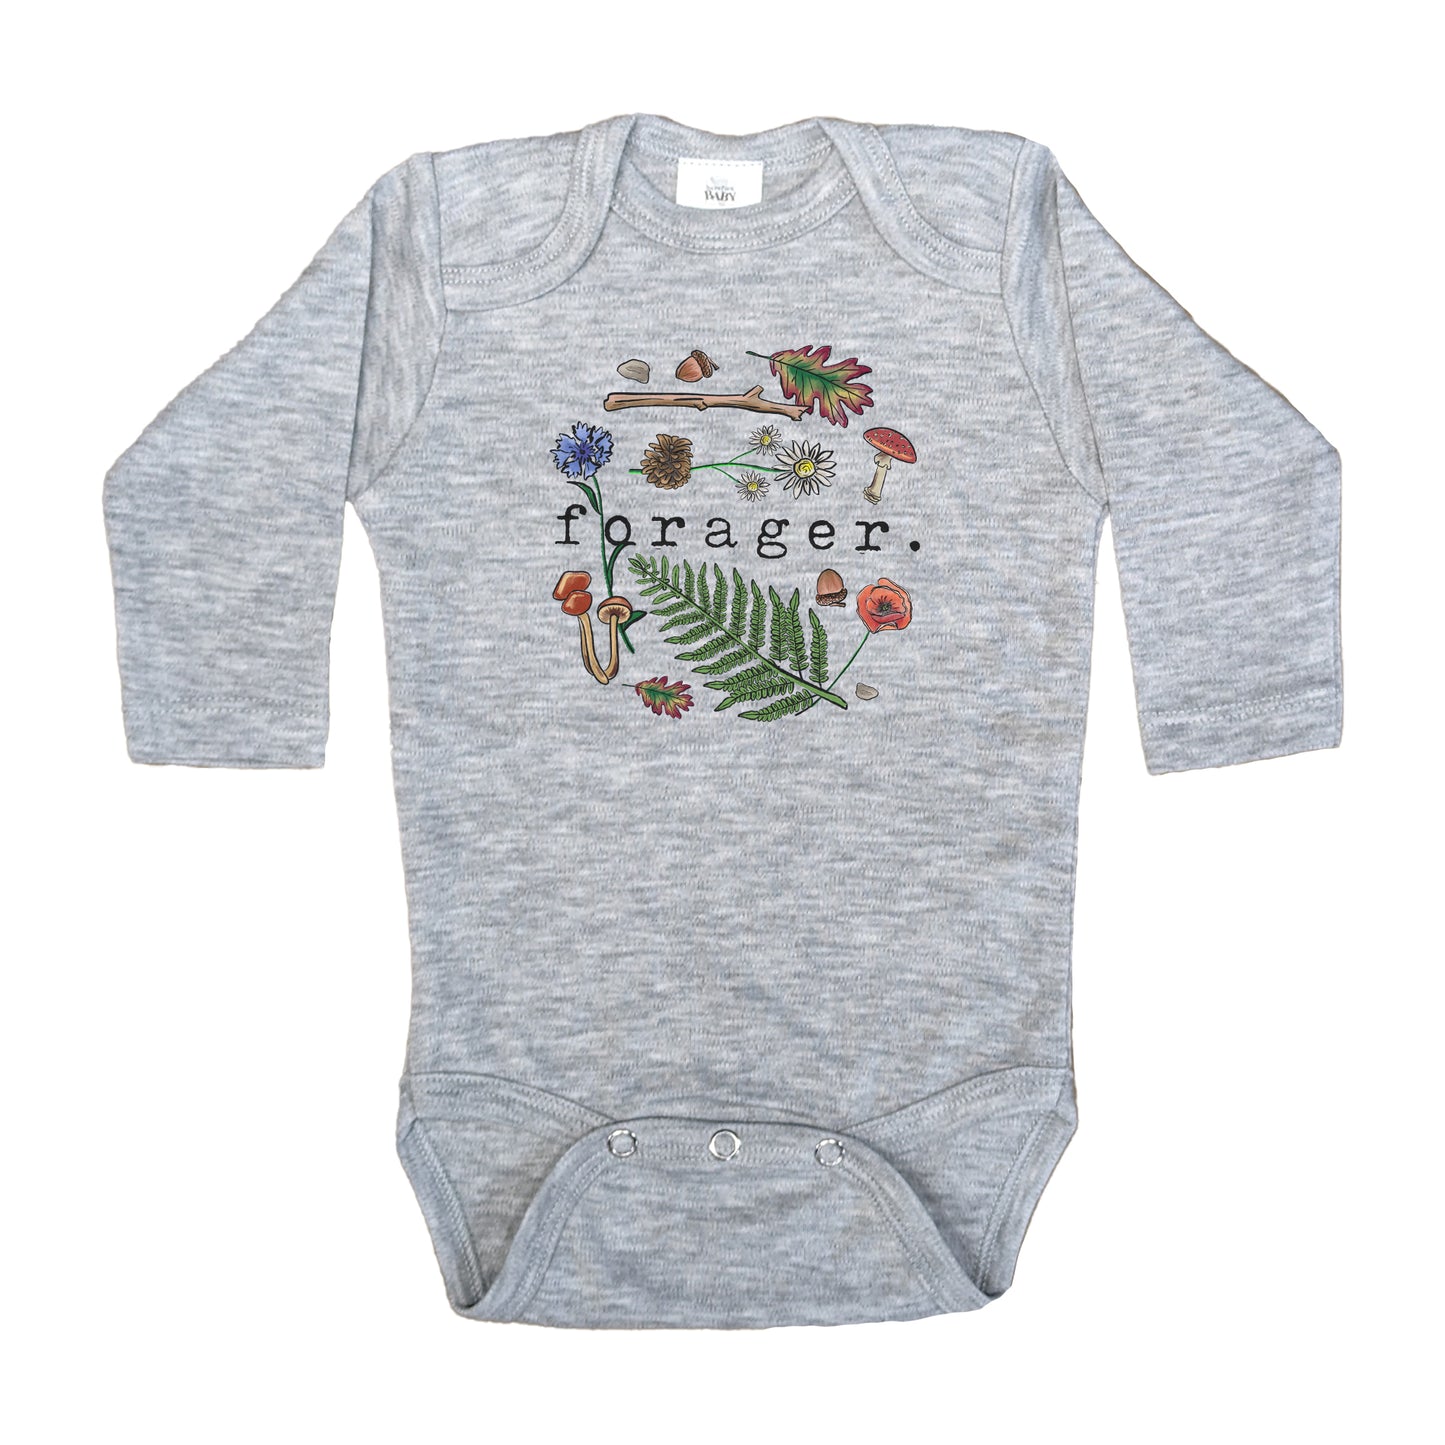 "Forager" Nature Baby Hiking GREY Body Suit